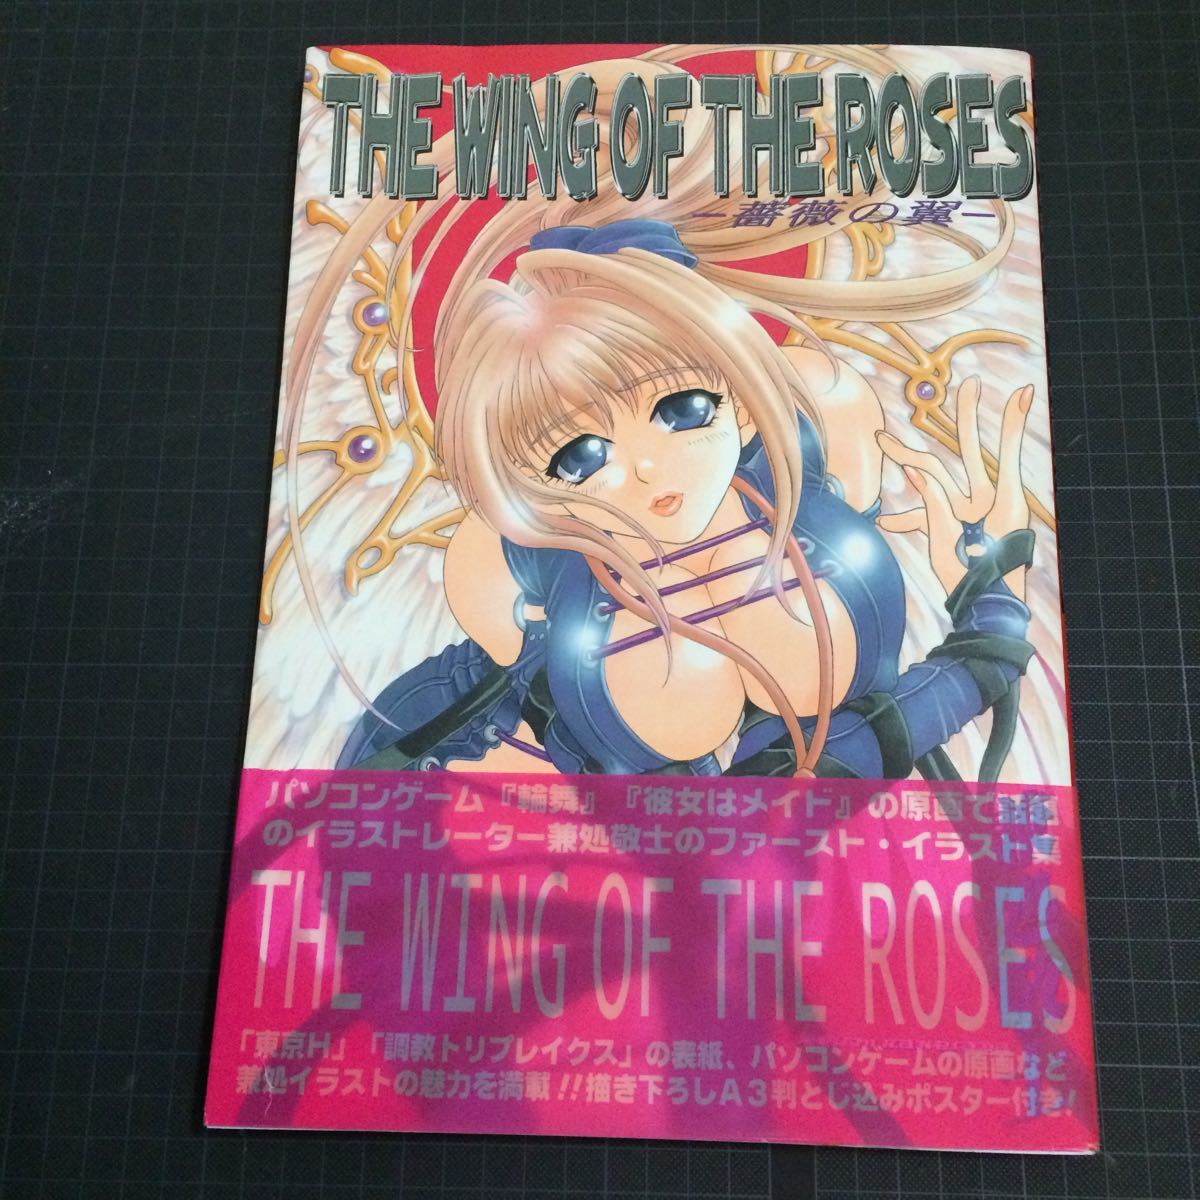 THE WING OF THE ROSES 薔薇の翼